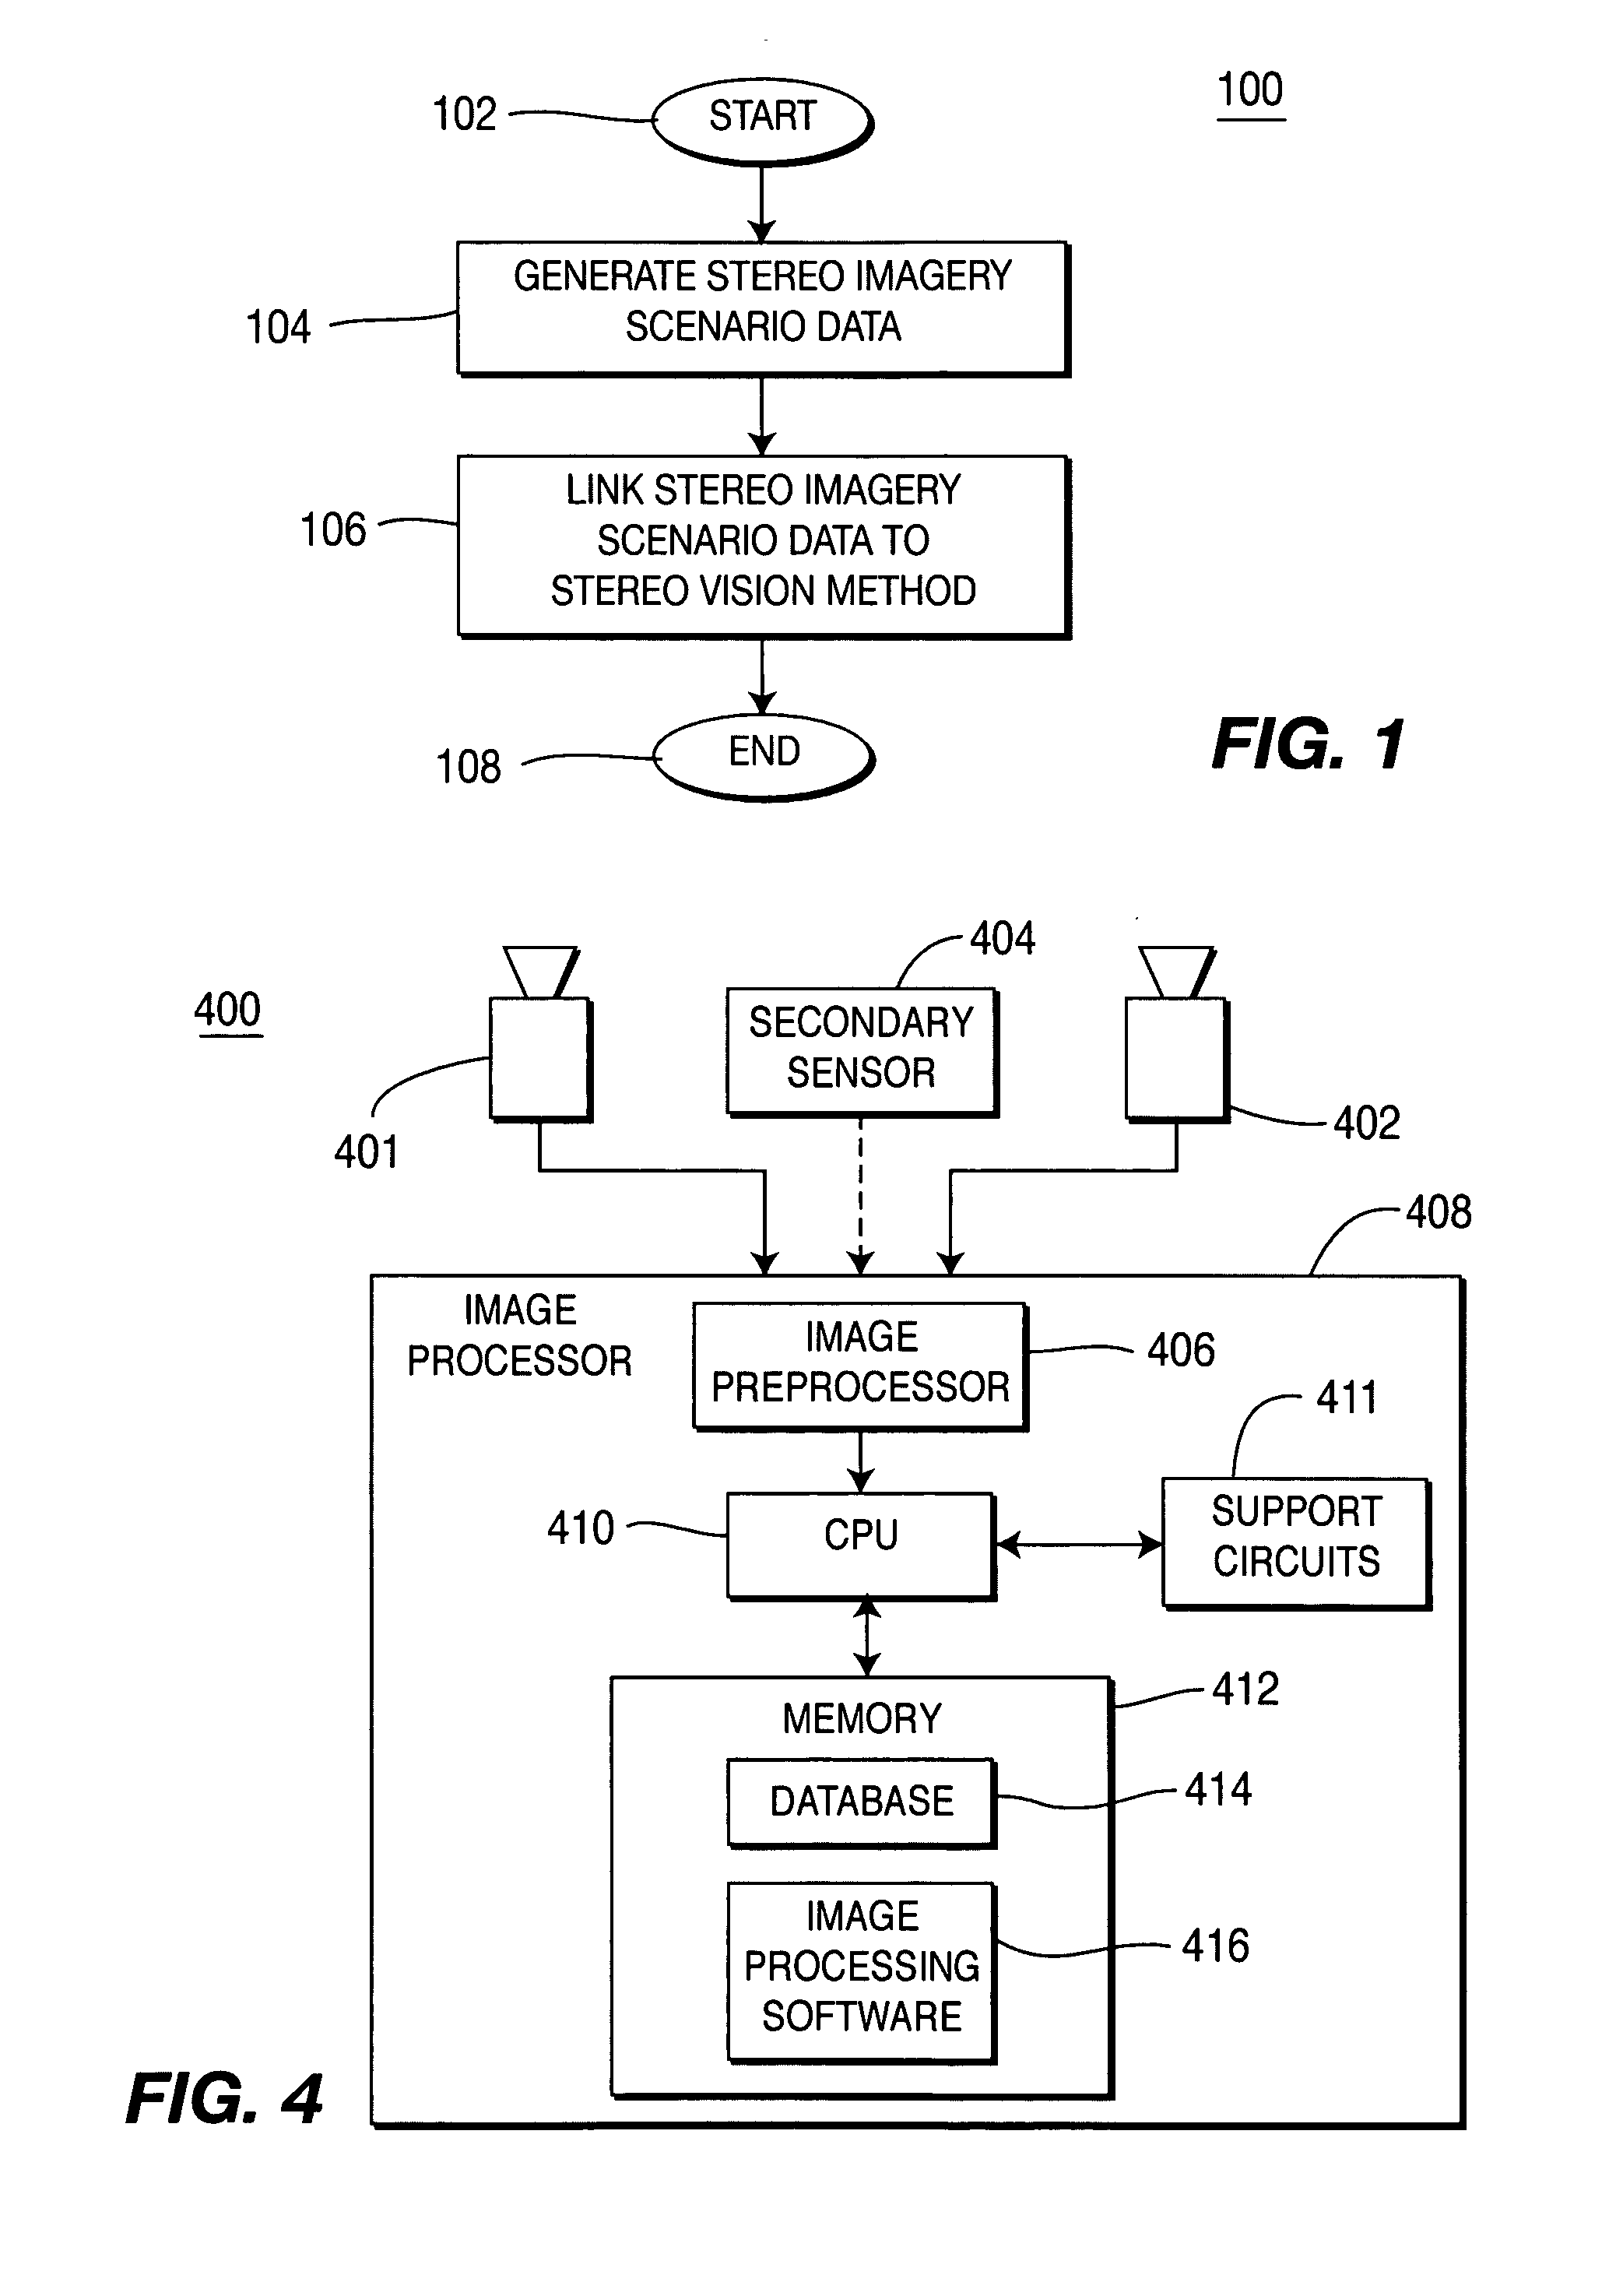 Method and apparatus for testing stereo vision methods using stereo imagery data